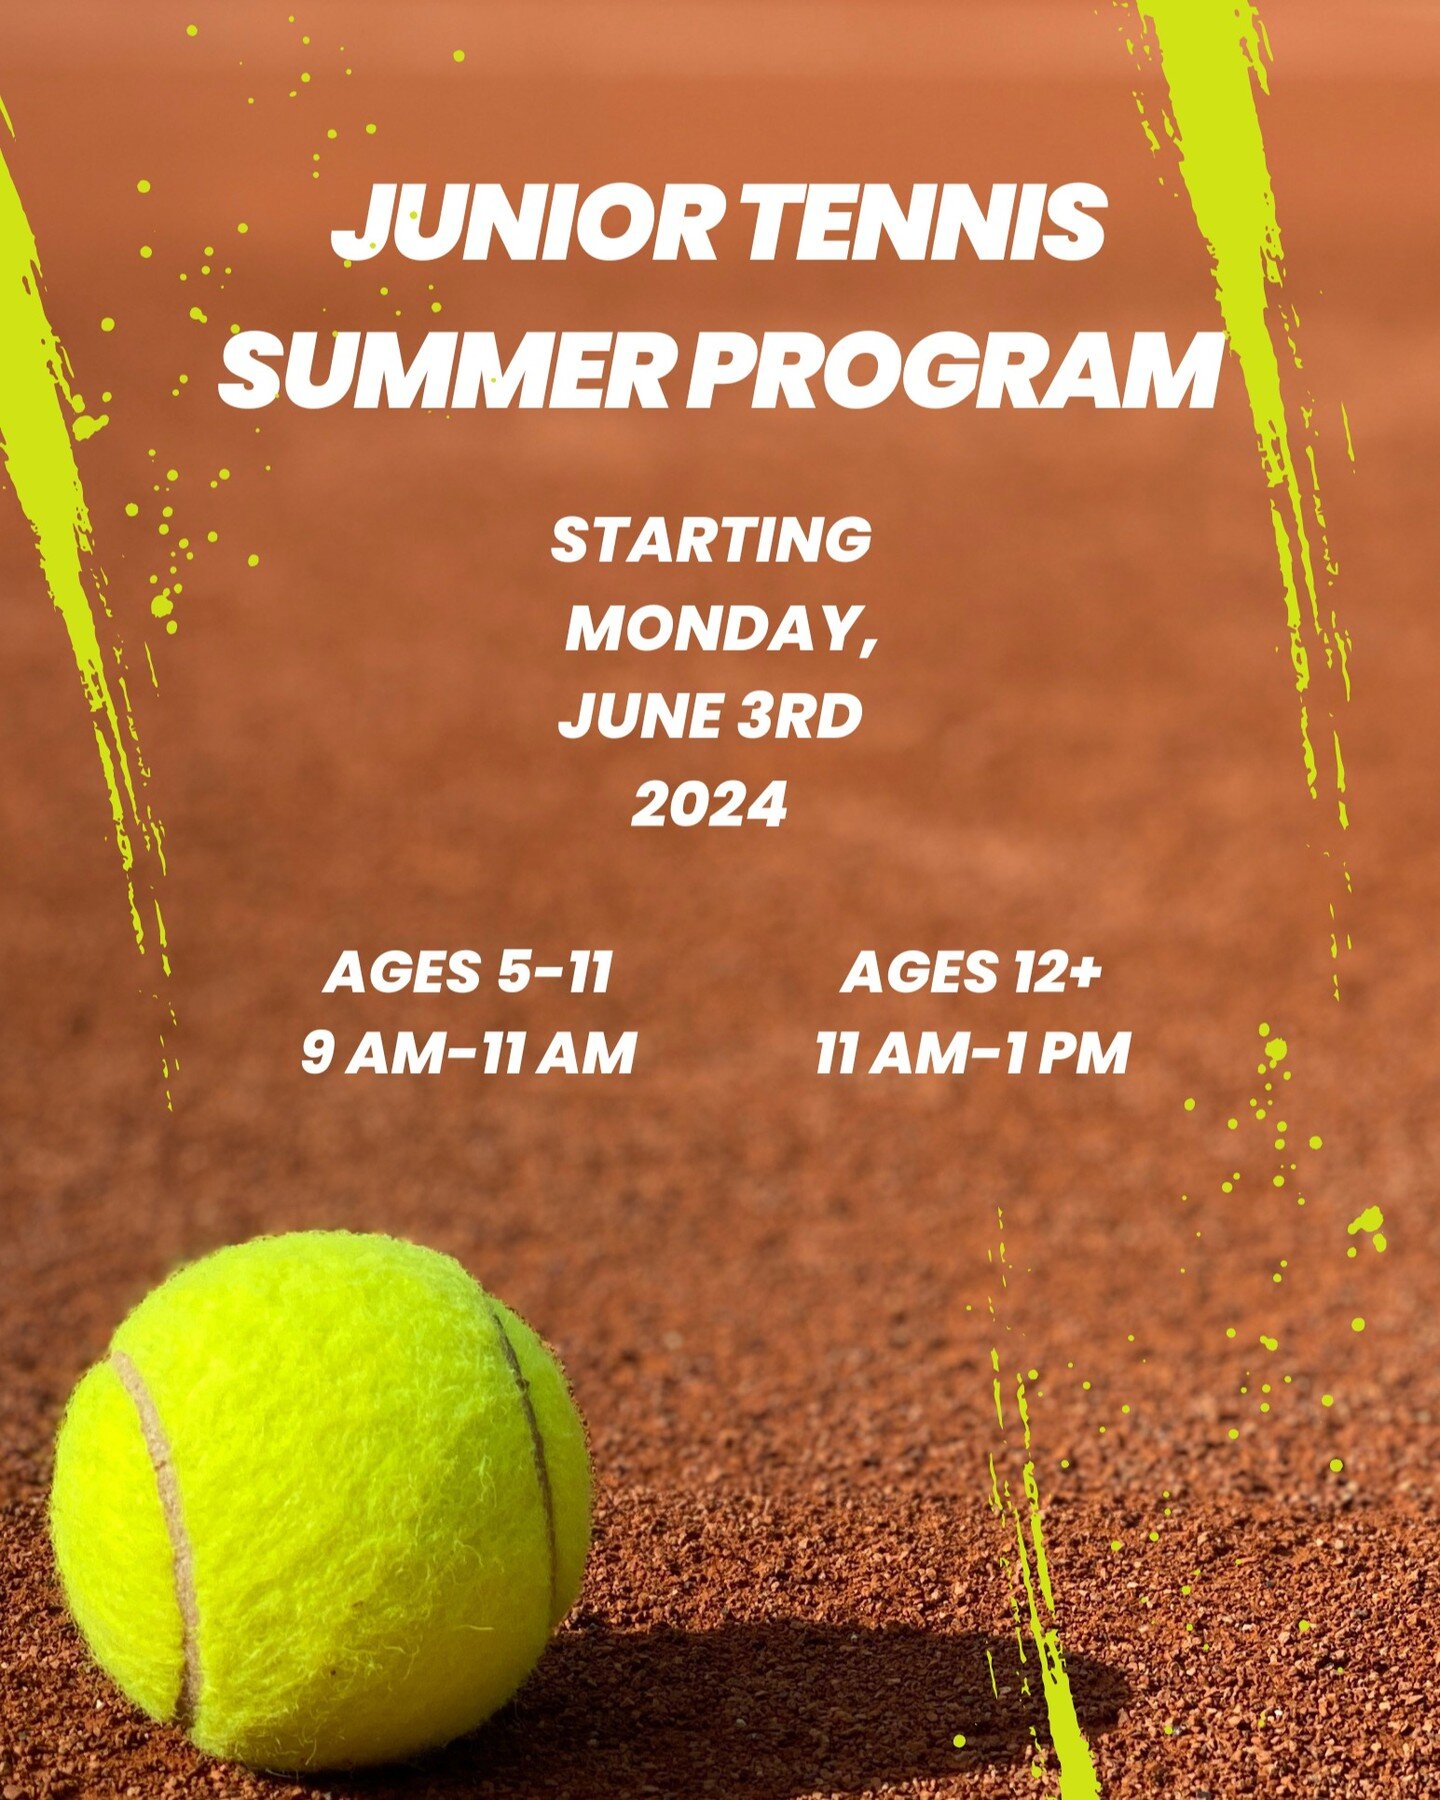 We are looking forward to summer here at Lakewood! ☀️🎾

The junior summer program will take the place of the junior after school program, starting June 3rd. 

For questions about pricing or membership options, give us a call or visit our website at 